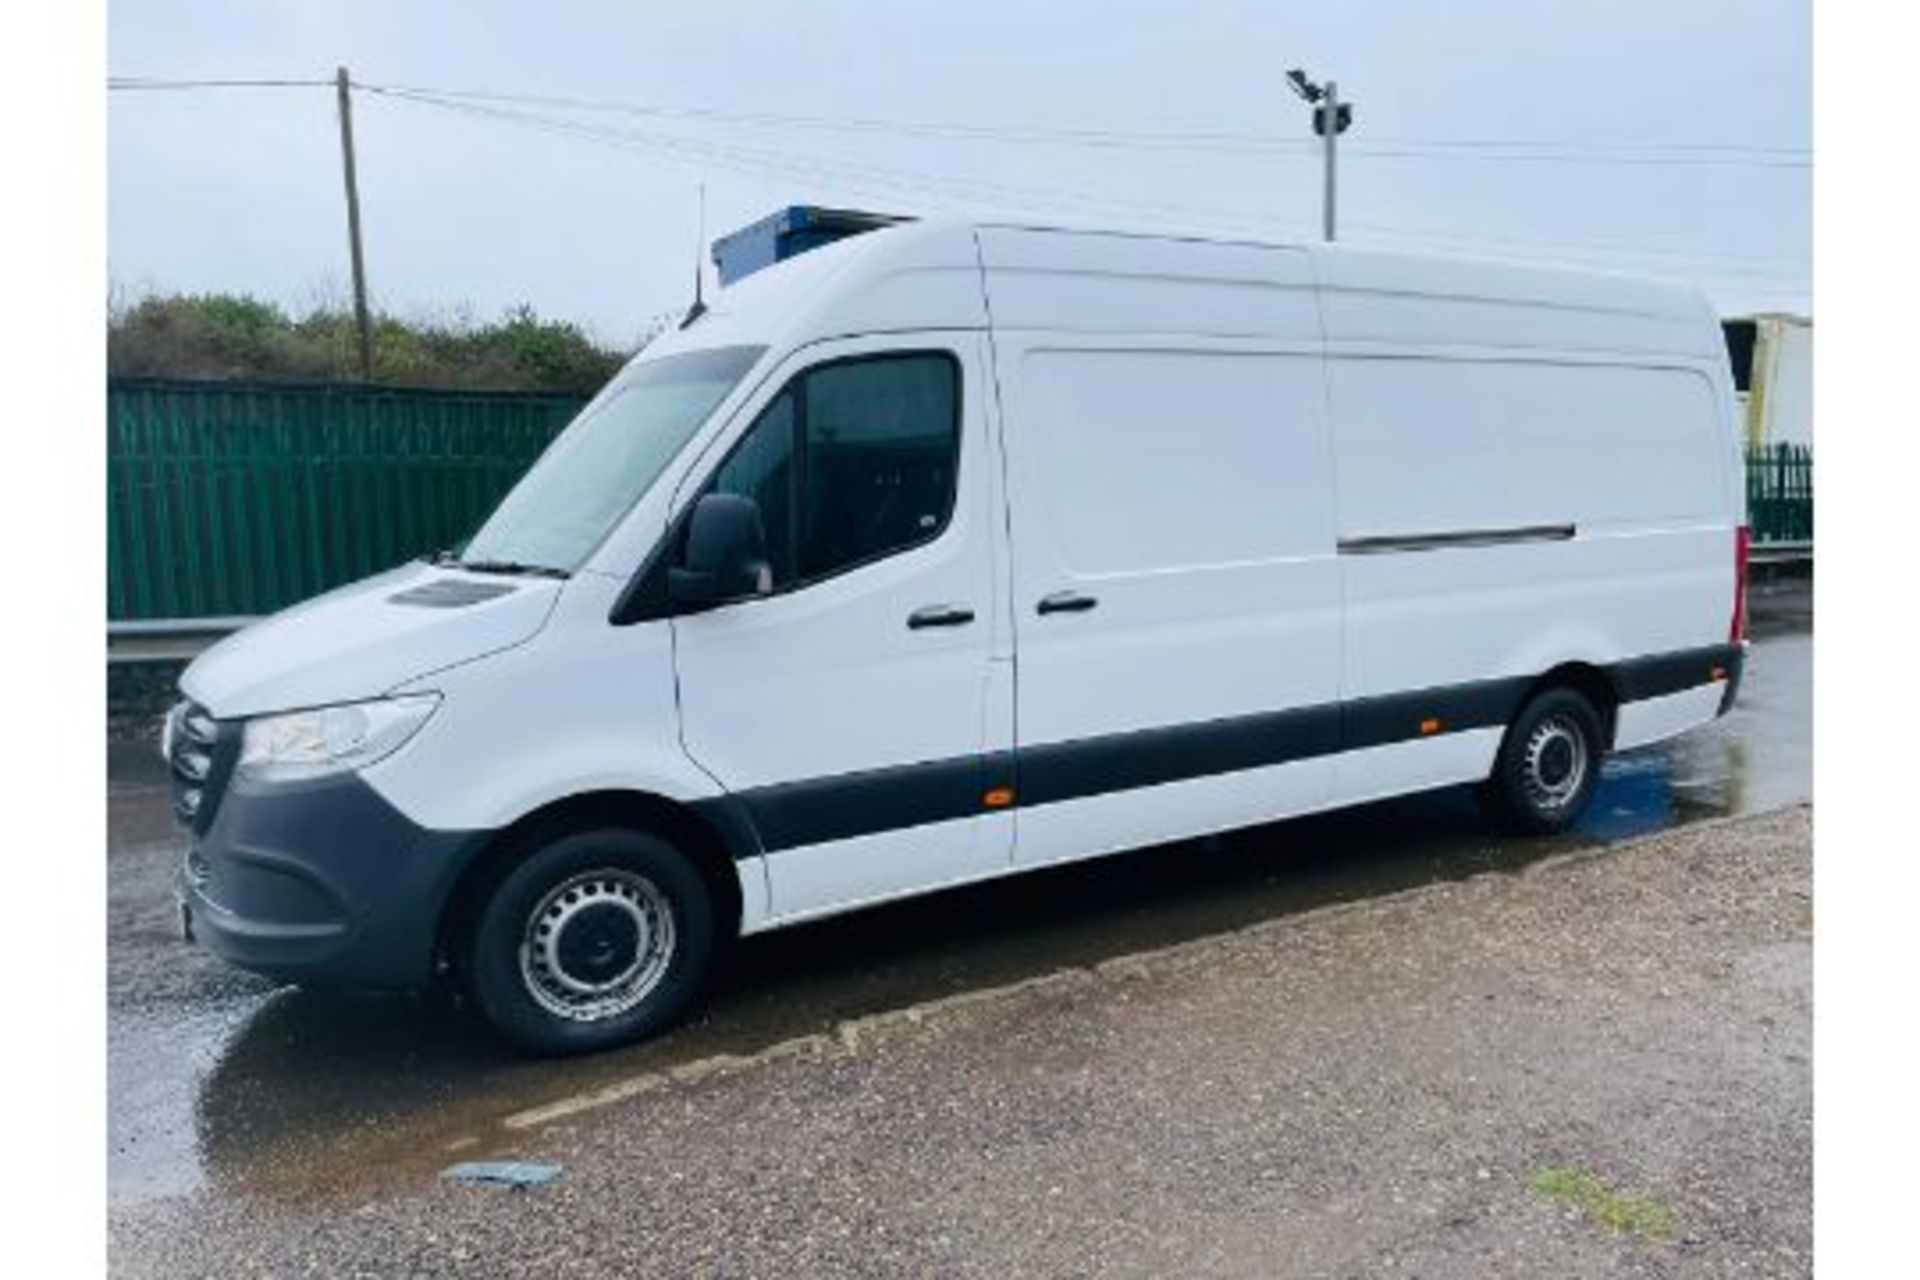 MERCEDES SPRINTER 315CDI LWB HIGH TOP 70 REG 2021 - 1 Owner From New - Euro 6 - Image 2 of 13